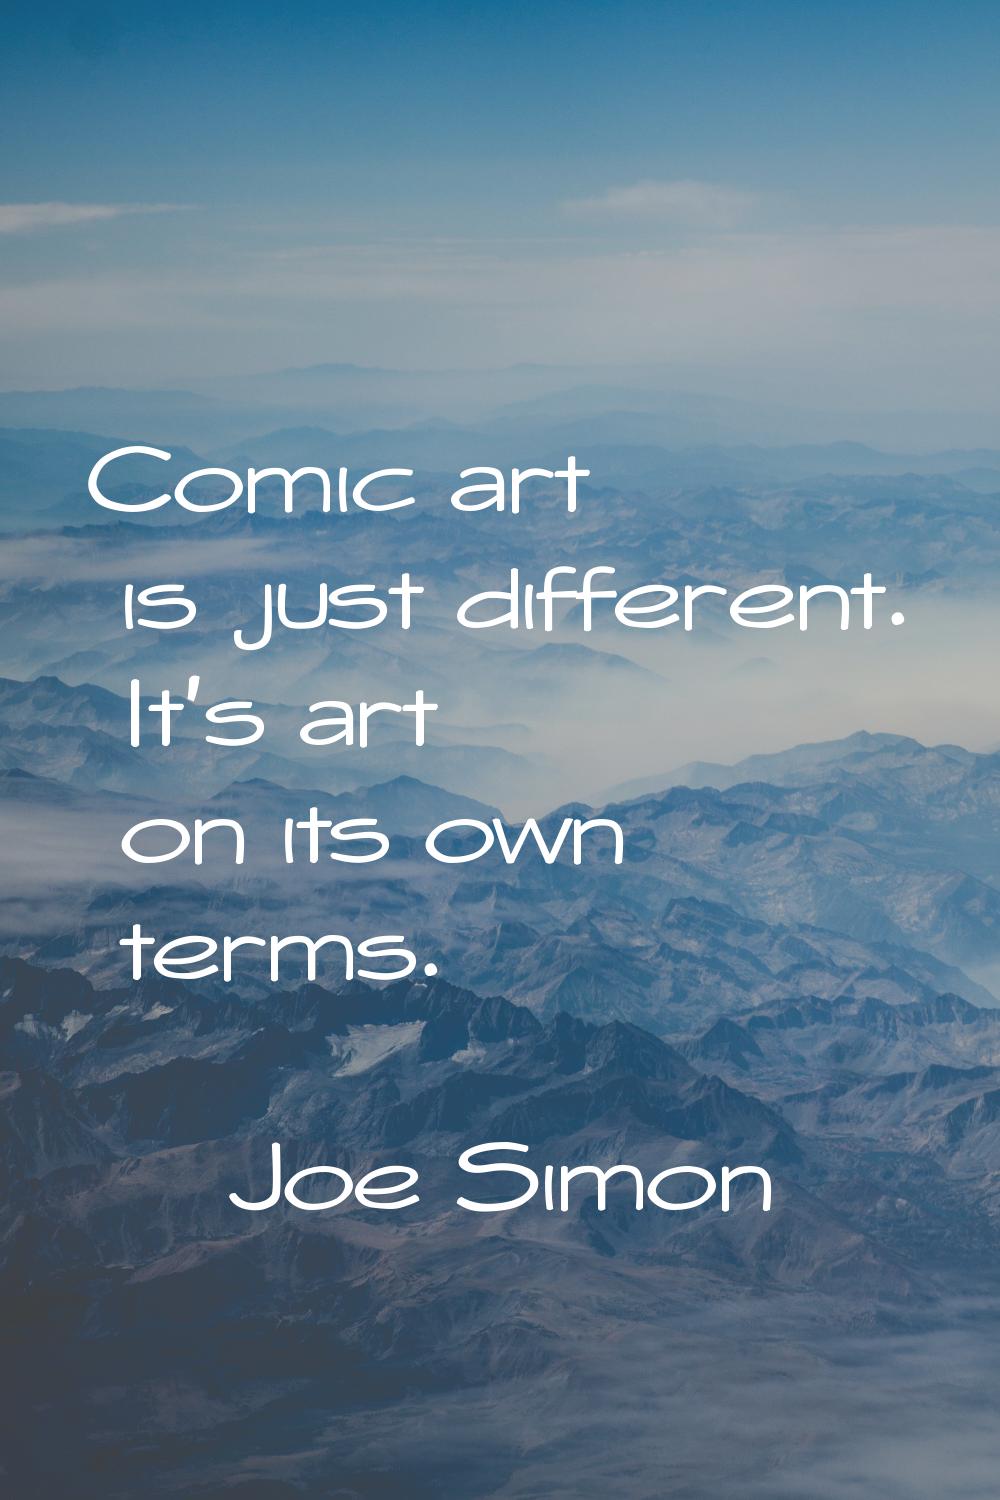 Comic art is just different. It's art on its own terms.